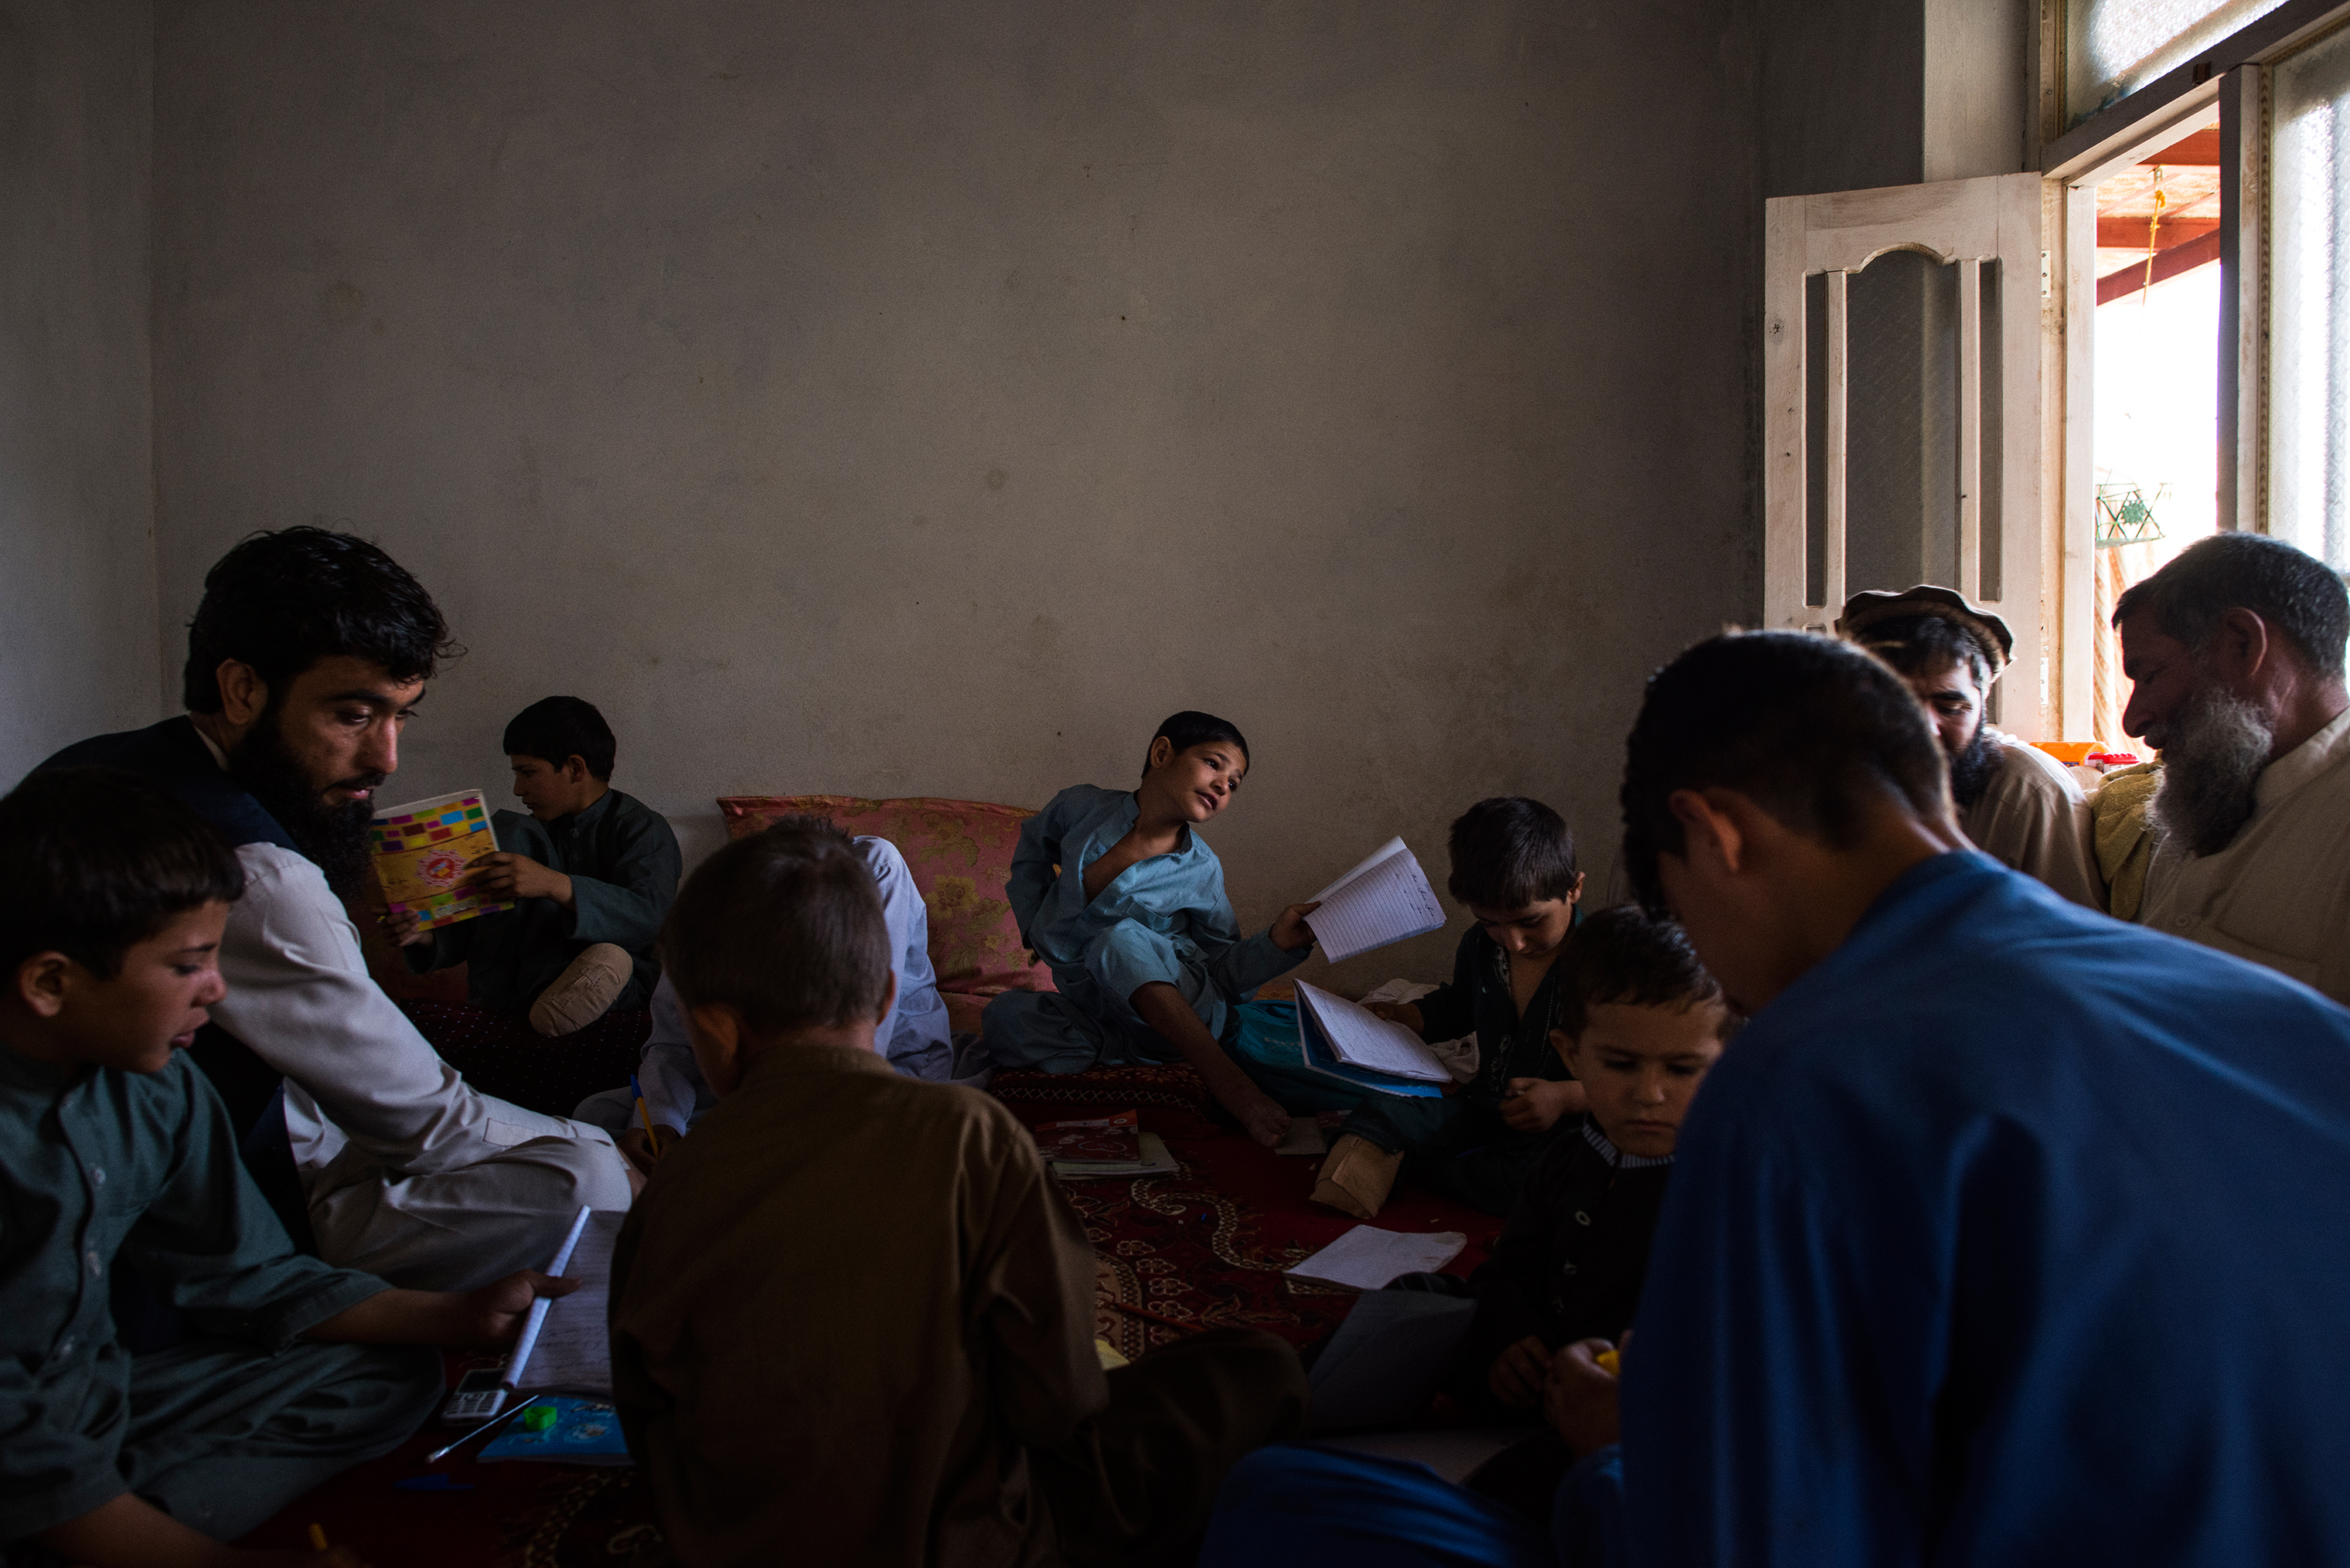 During the children's recovery, they continued to study with a teacher provided by a small charity, Enabled Children. This lesson, in June, was conducted at a neighbor's home as their own was undergoing construction work. (Andrew Quilty for TIME)